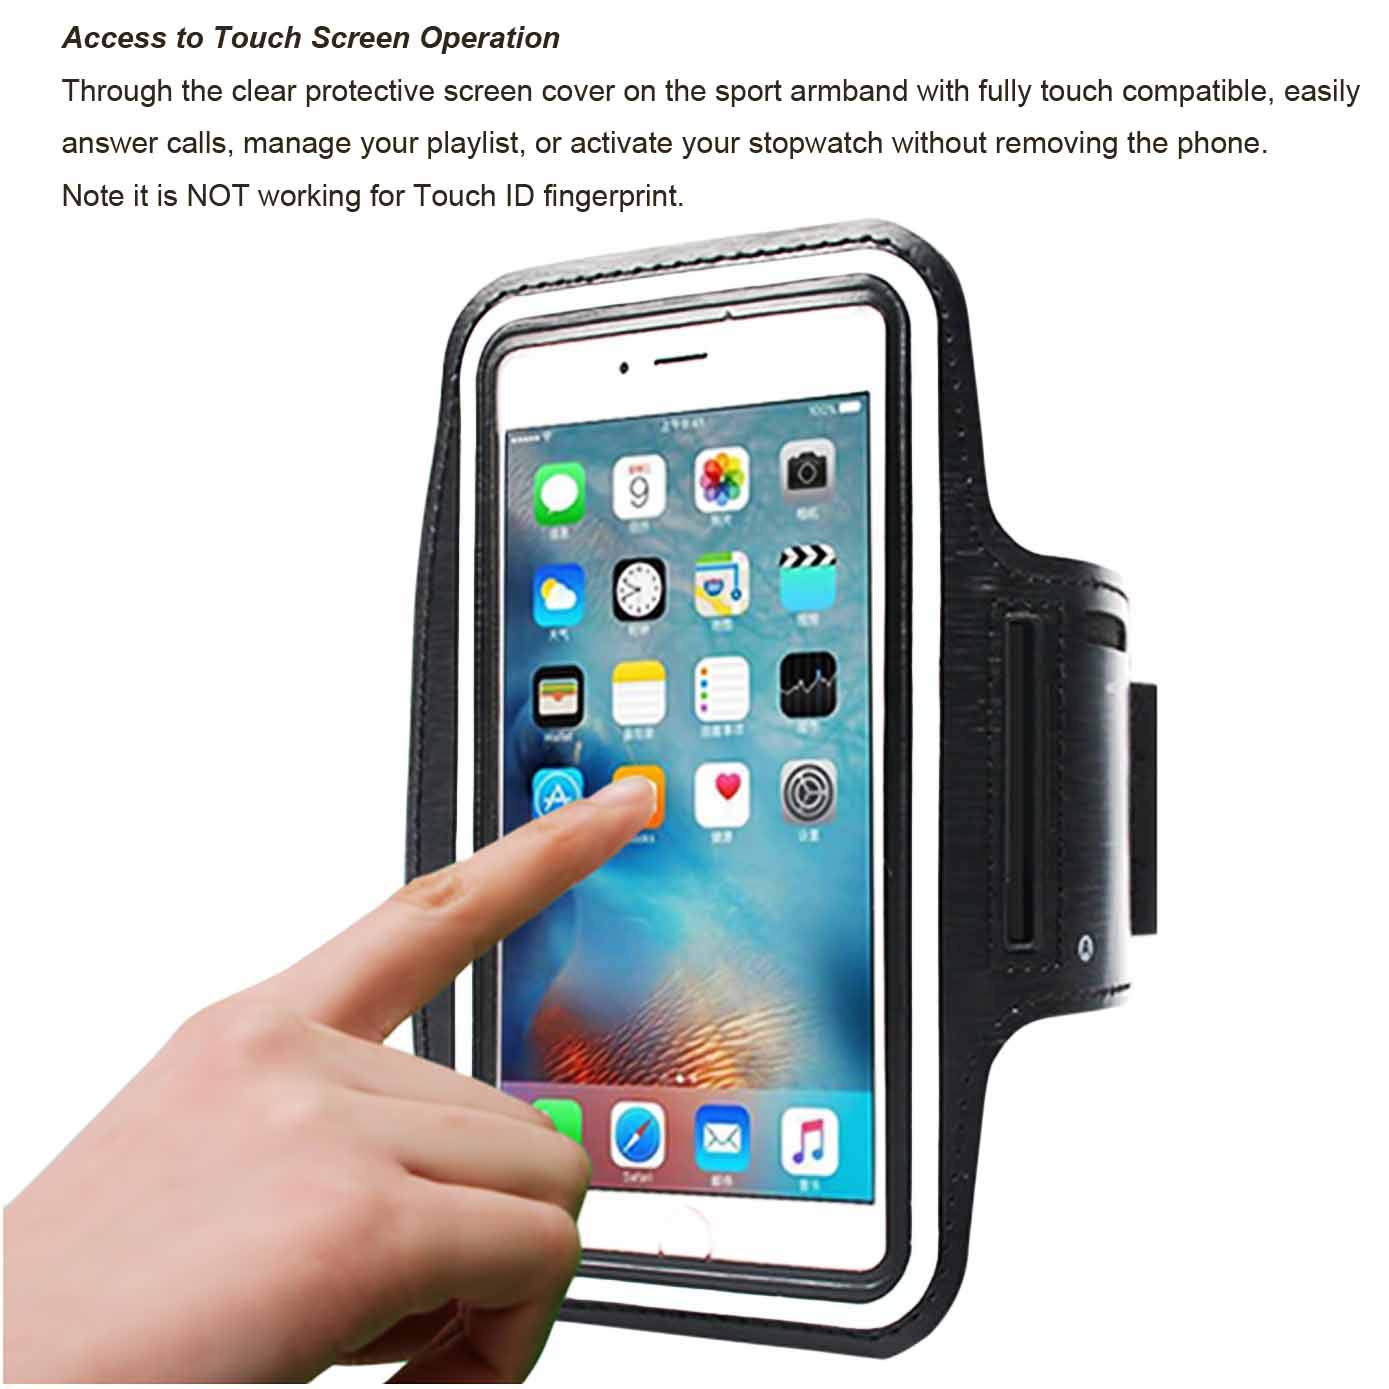 2 Pack Cell Phone Armband Compatible with iPhone X Xs,8 7 6 6S 8, 7,6S,SE,5S,5C,5,4S,4,GalaxyS9,S8,S7,S6,Water Resistant Breathable Phone for Running, Biking-Black+Silver